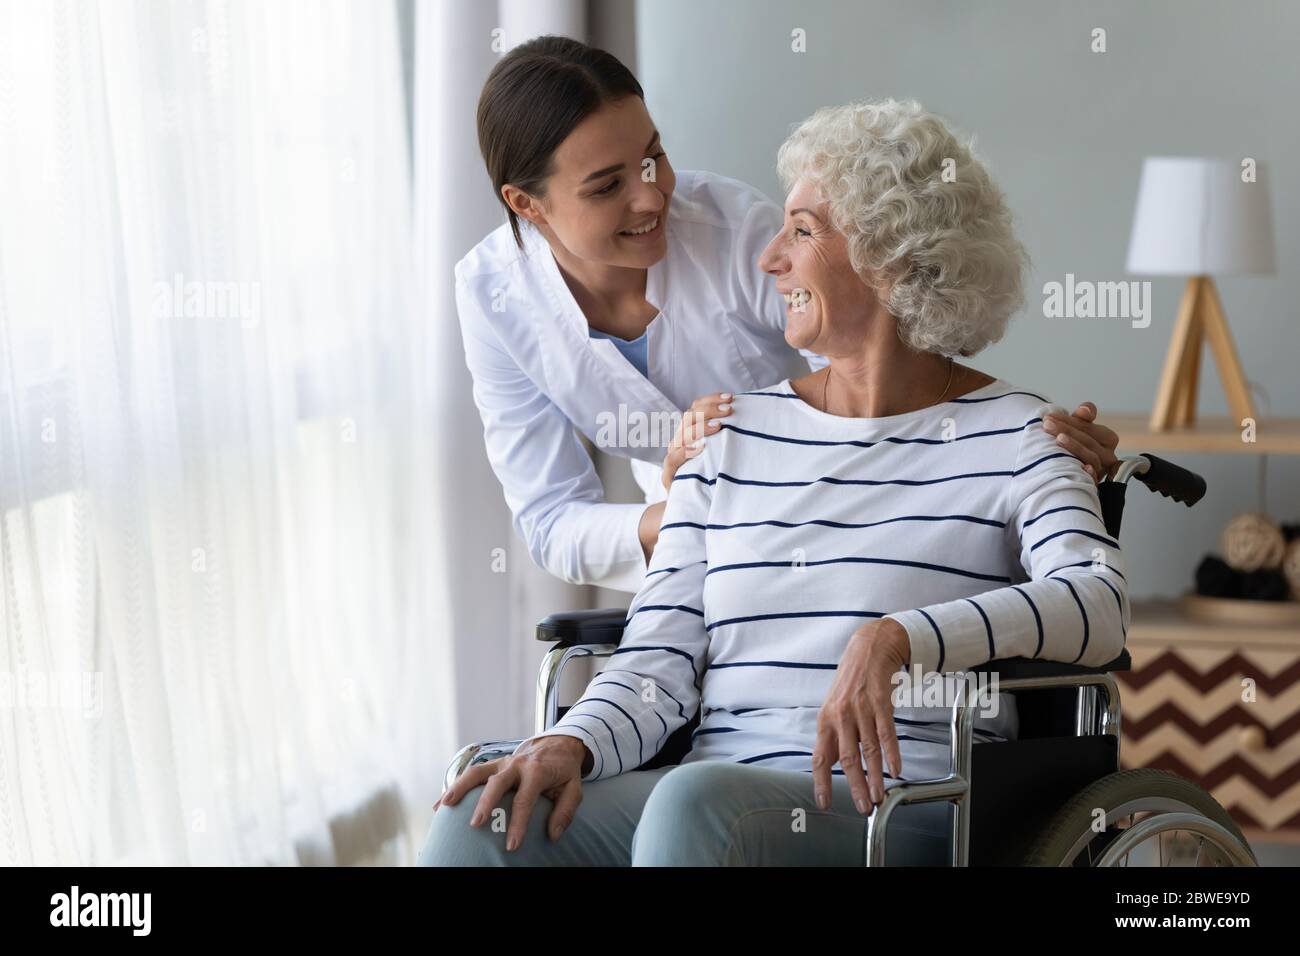 Smiling disabled elderly woman in wheelchair talking with caring nurse Stock Photo